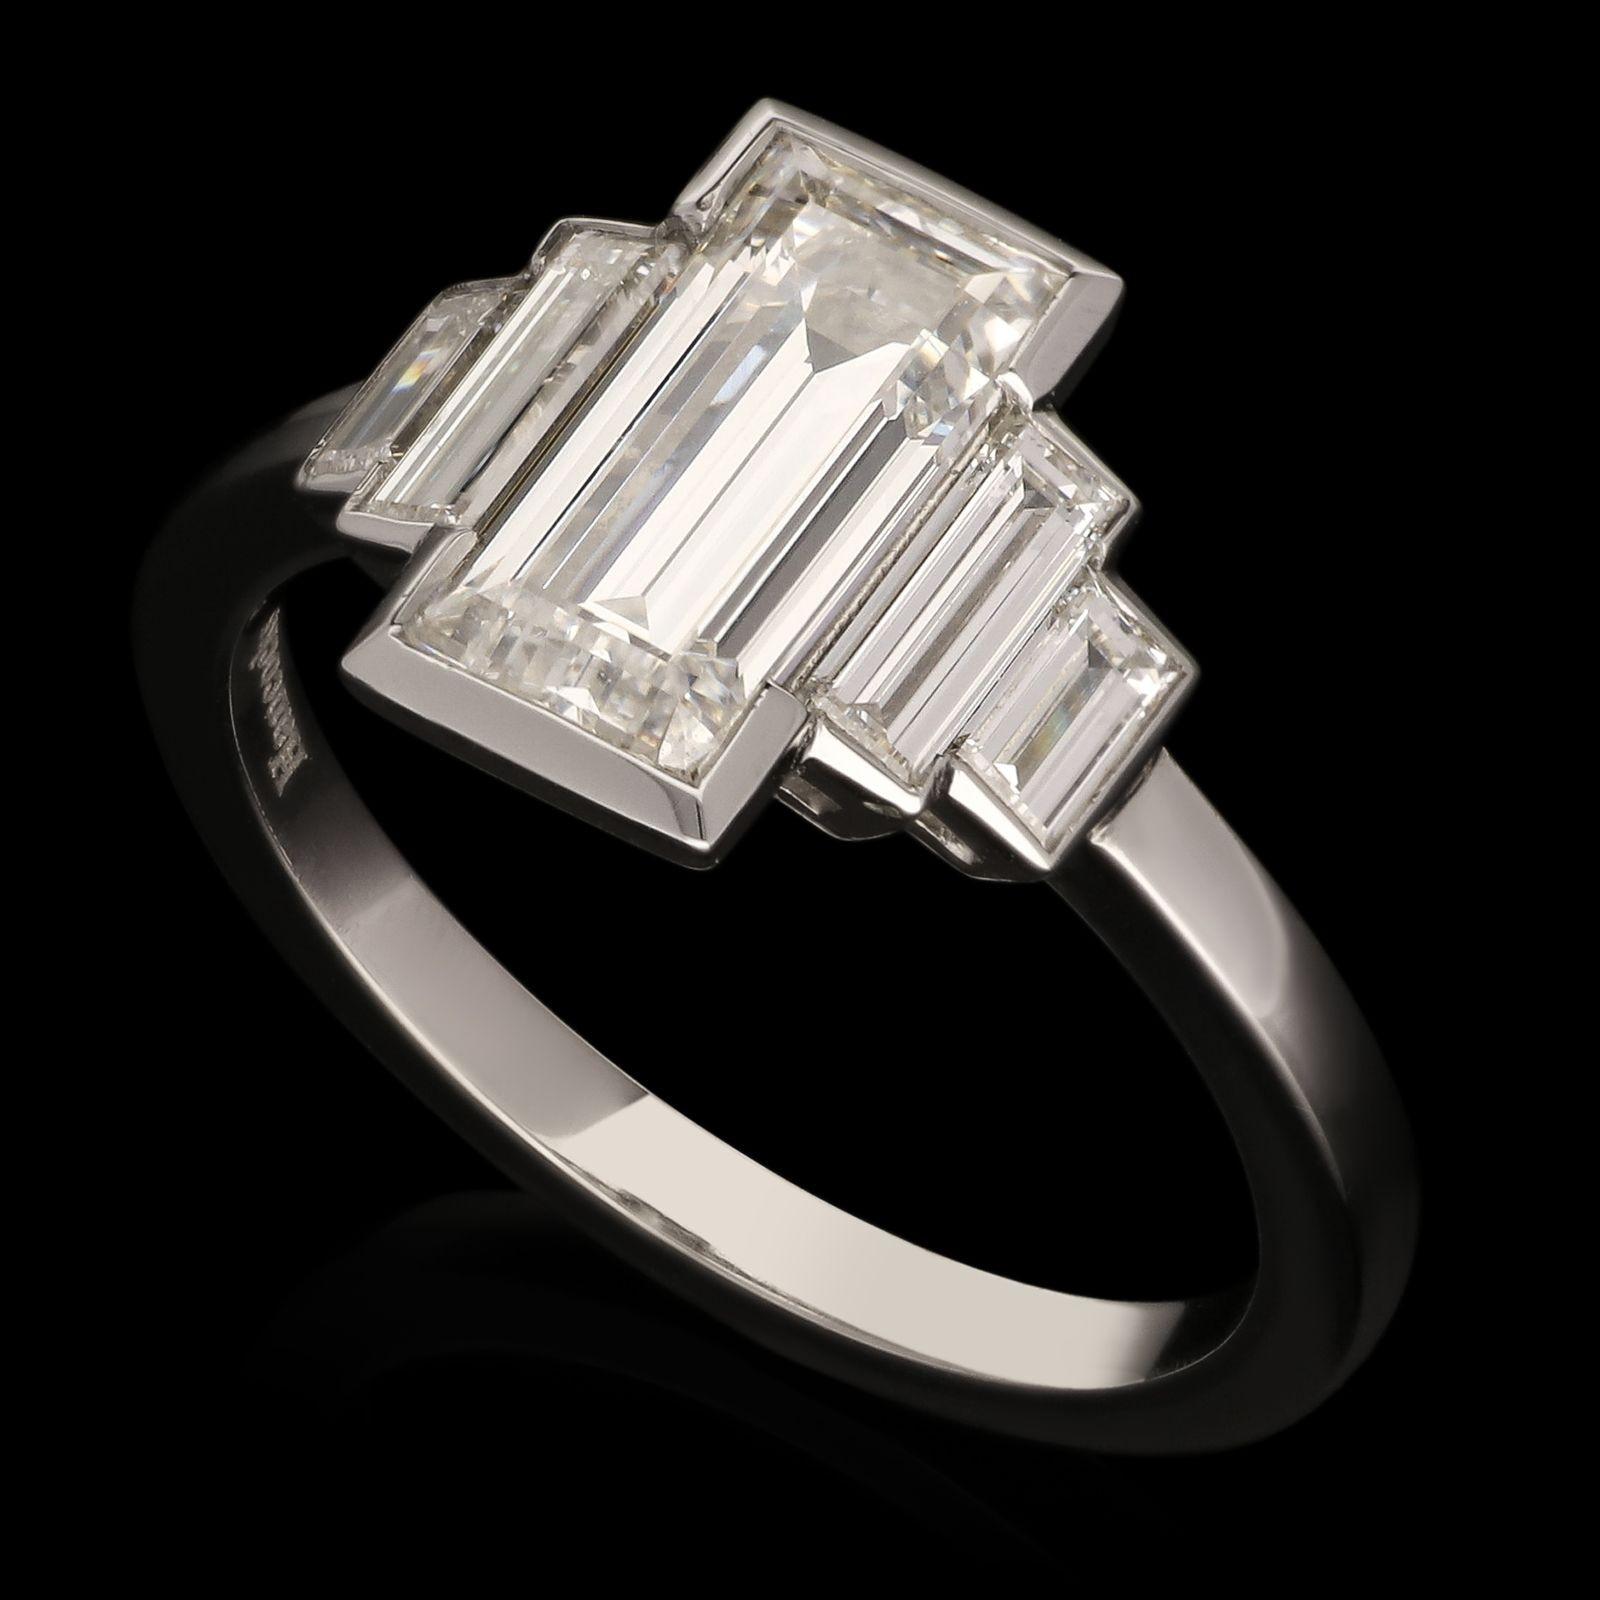 A stunning baguette-cut diamond ring by Hancocks, centred on an elegant, elongated emerald-cut diamond weighing 1.54cts and of F colour and SI1 clarity in a partial rub over setting between shoulders of two stepped baguette-cut diamonds also in